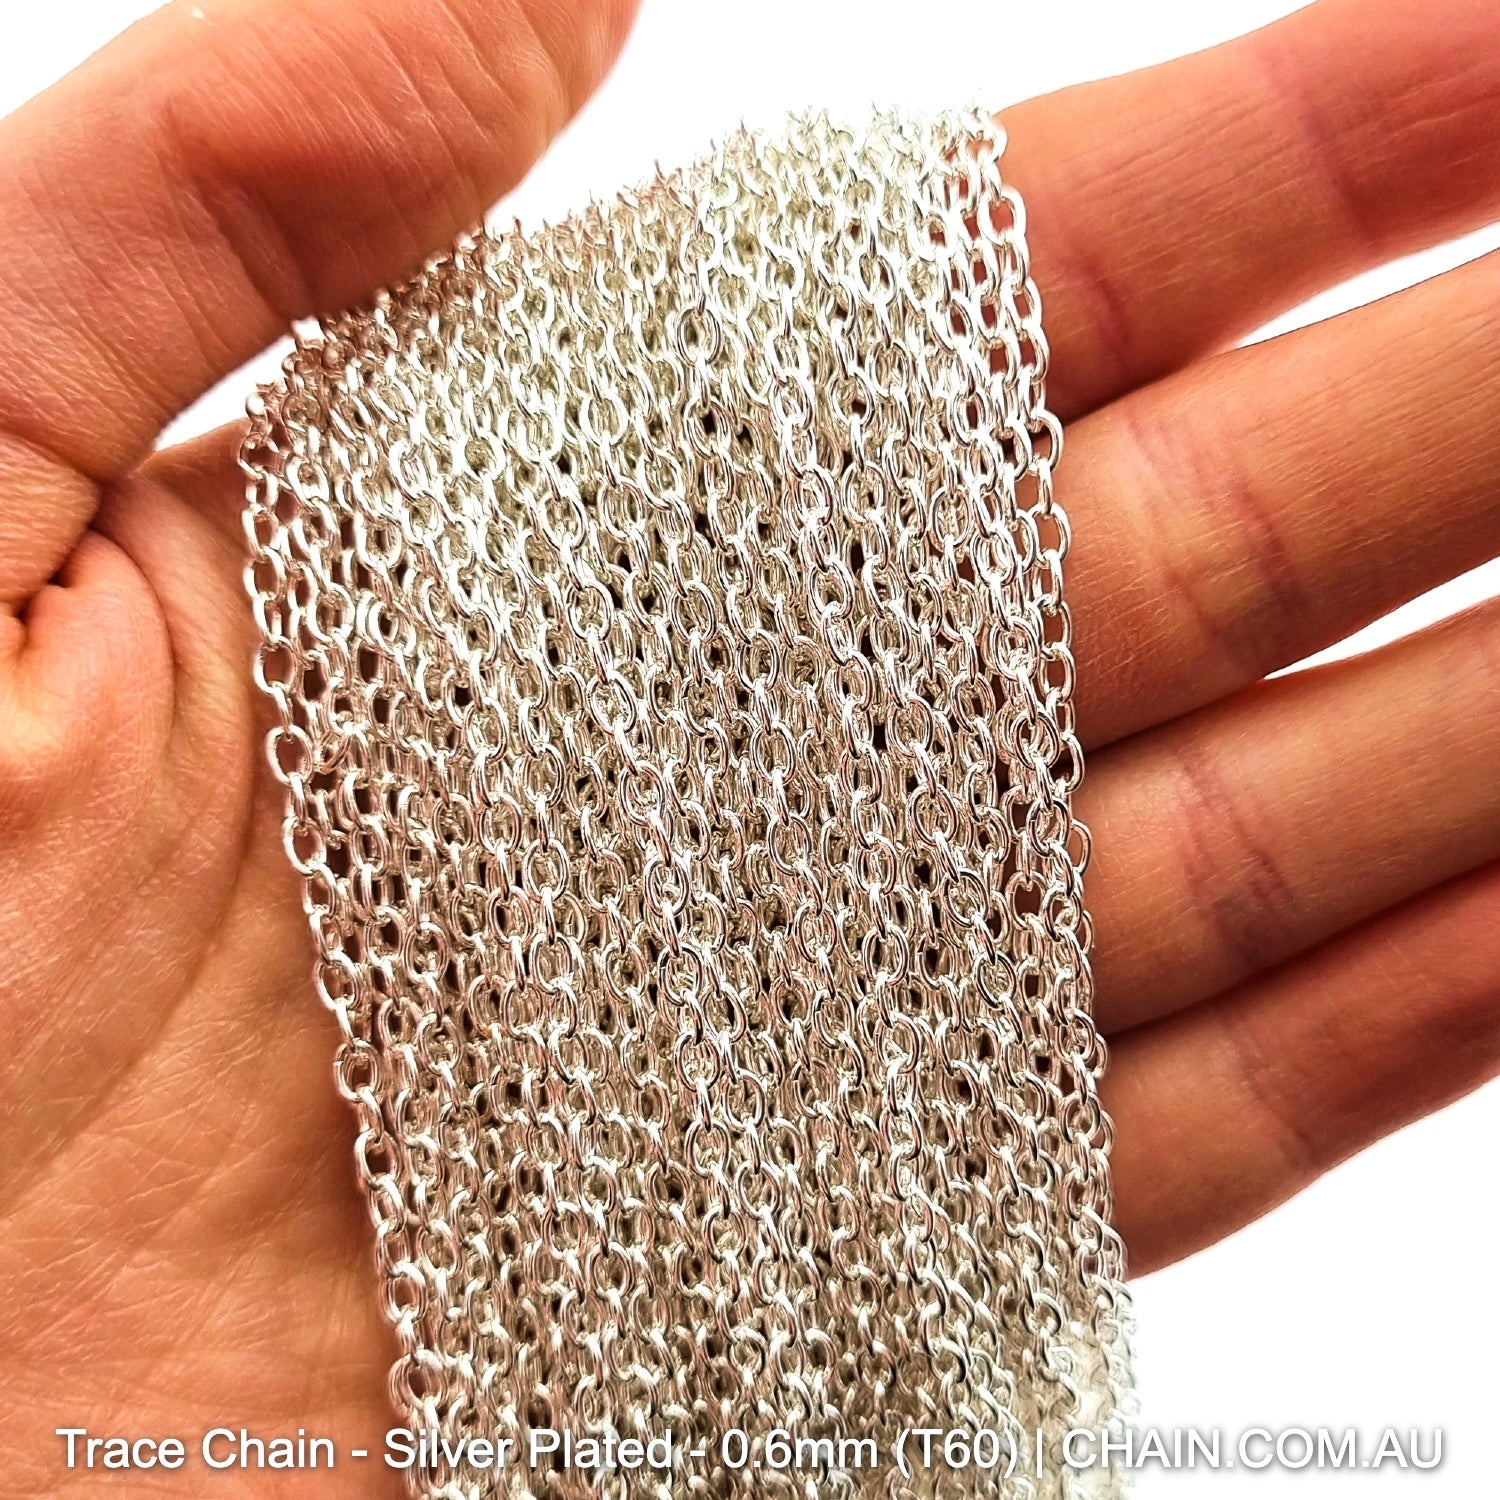 Trace Chain in a Silver Plated Finish. Size: 0.6mm, T60. Jewellery Chain, Australia wide shipping. Shop chain.com.au